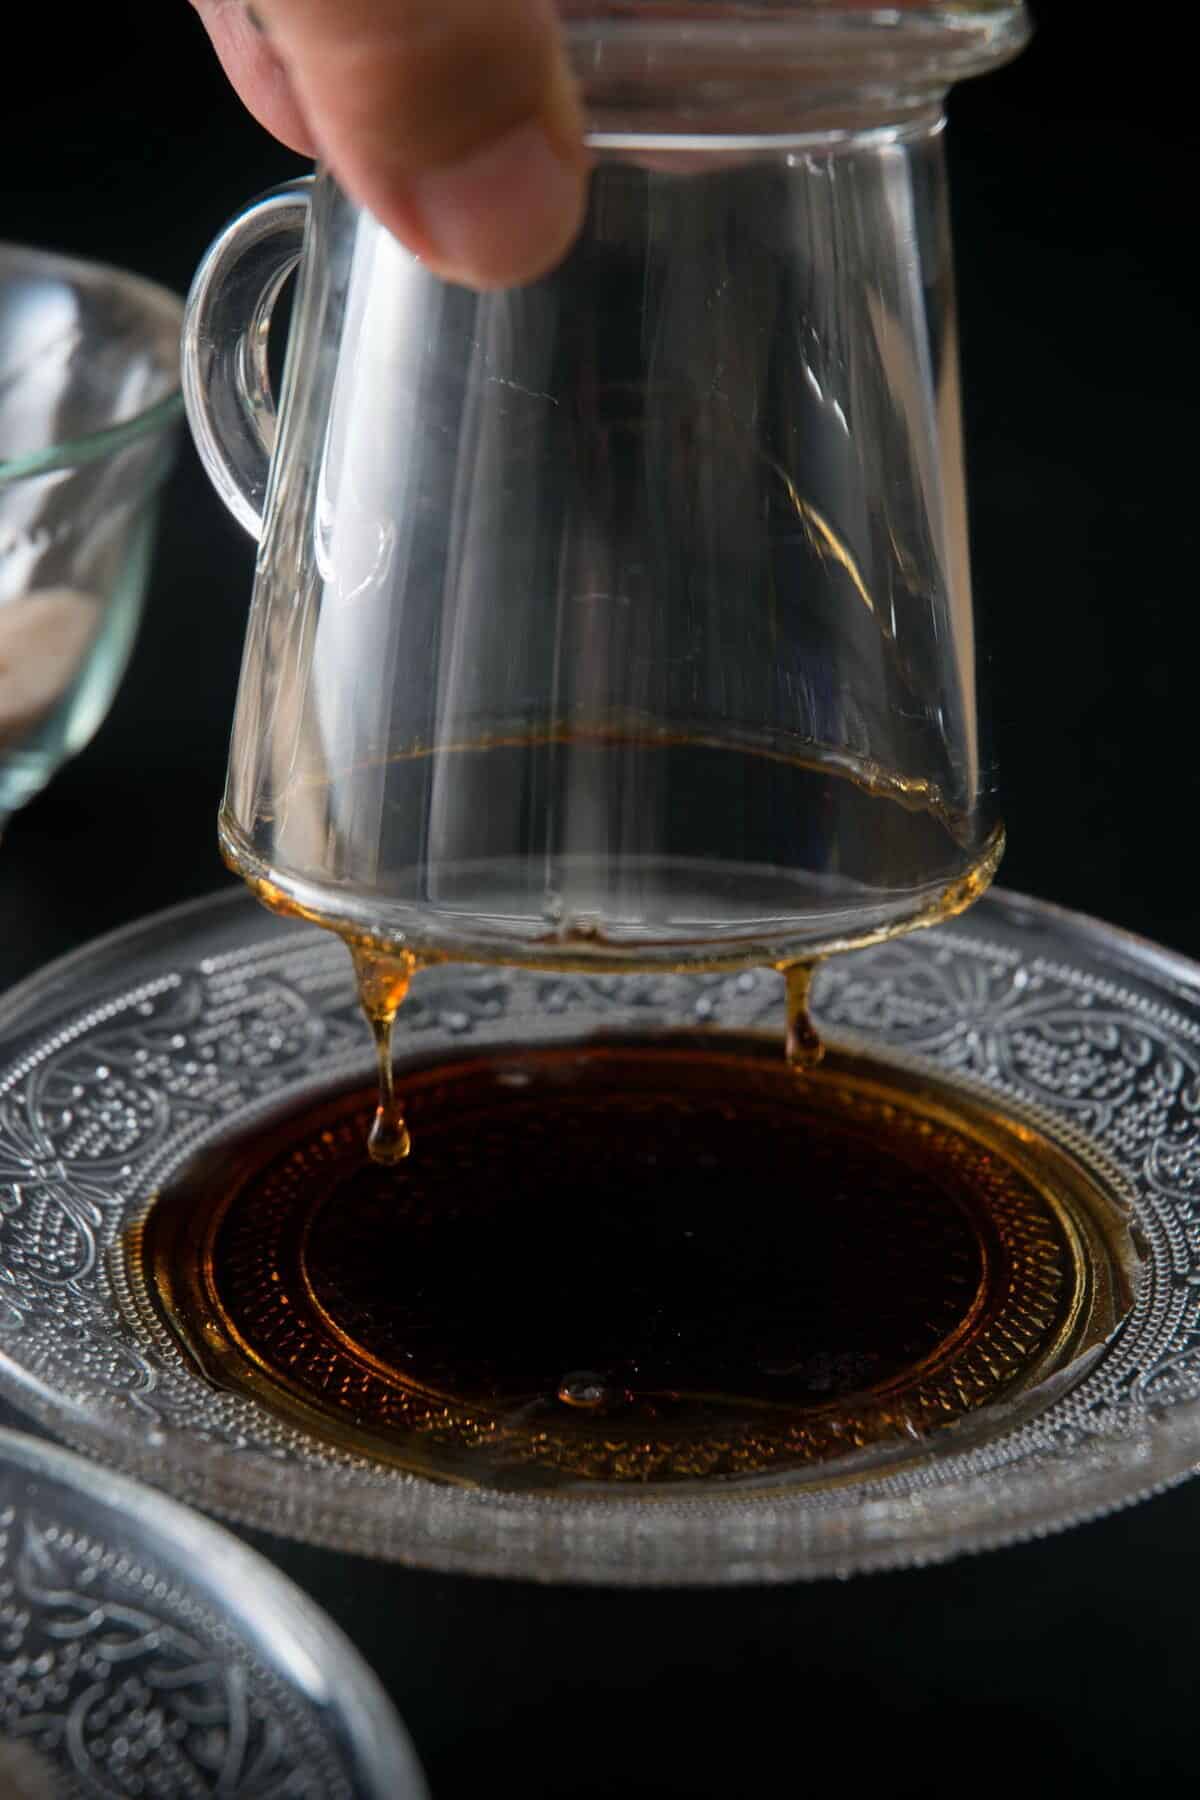 A clear glass coffee mug dipped into a plate of maple syrup.